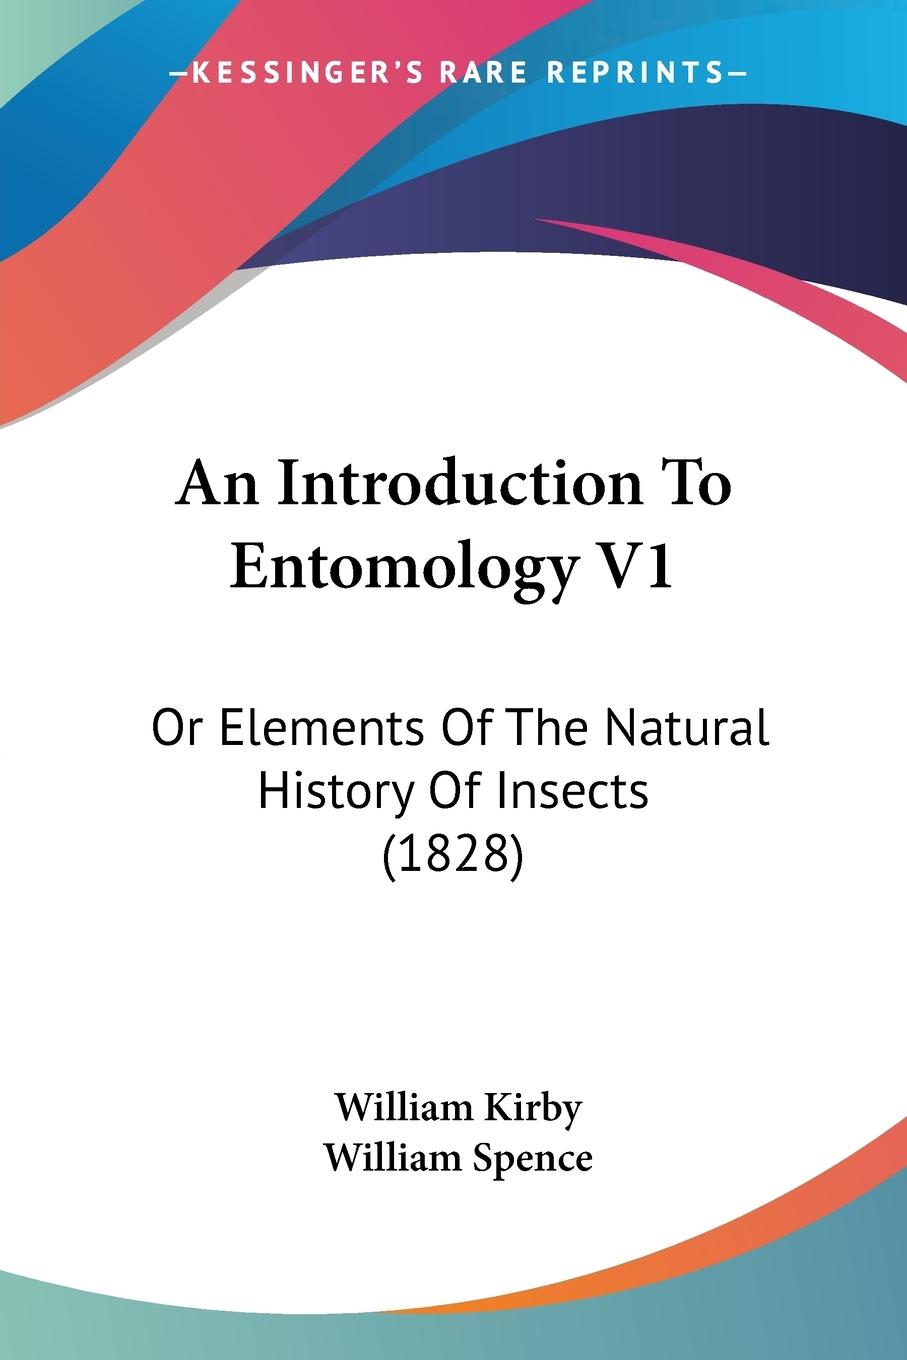 An Introduction To Entomology V1 - Kirby, William Spence, William